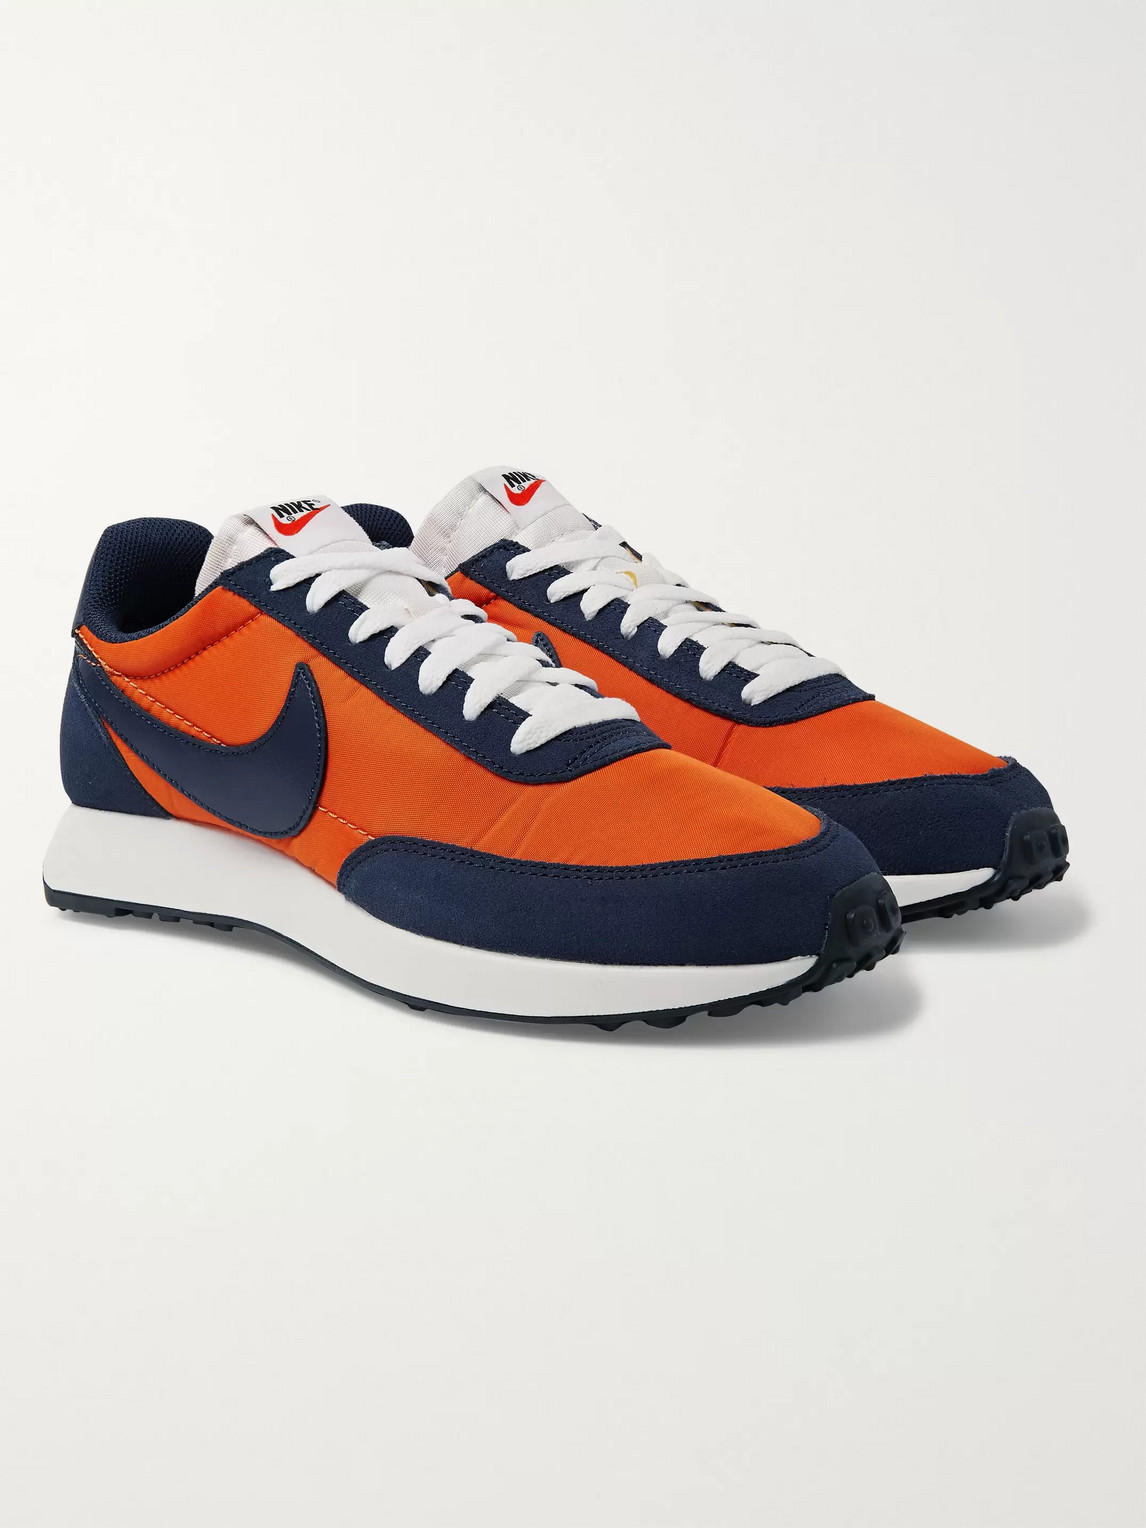 NIKE AIR TAILWIND 79 SHELL, SUEDE AND LEATHER trainers